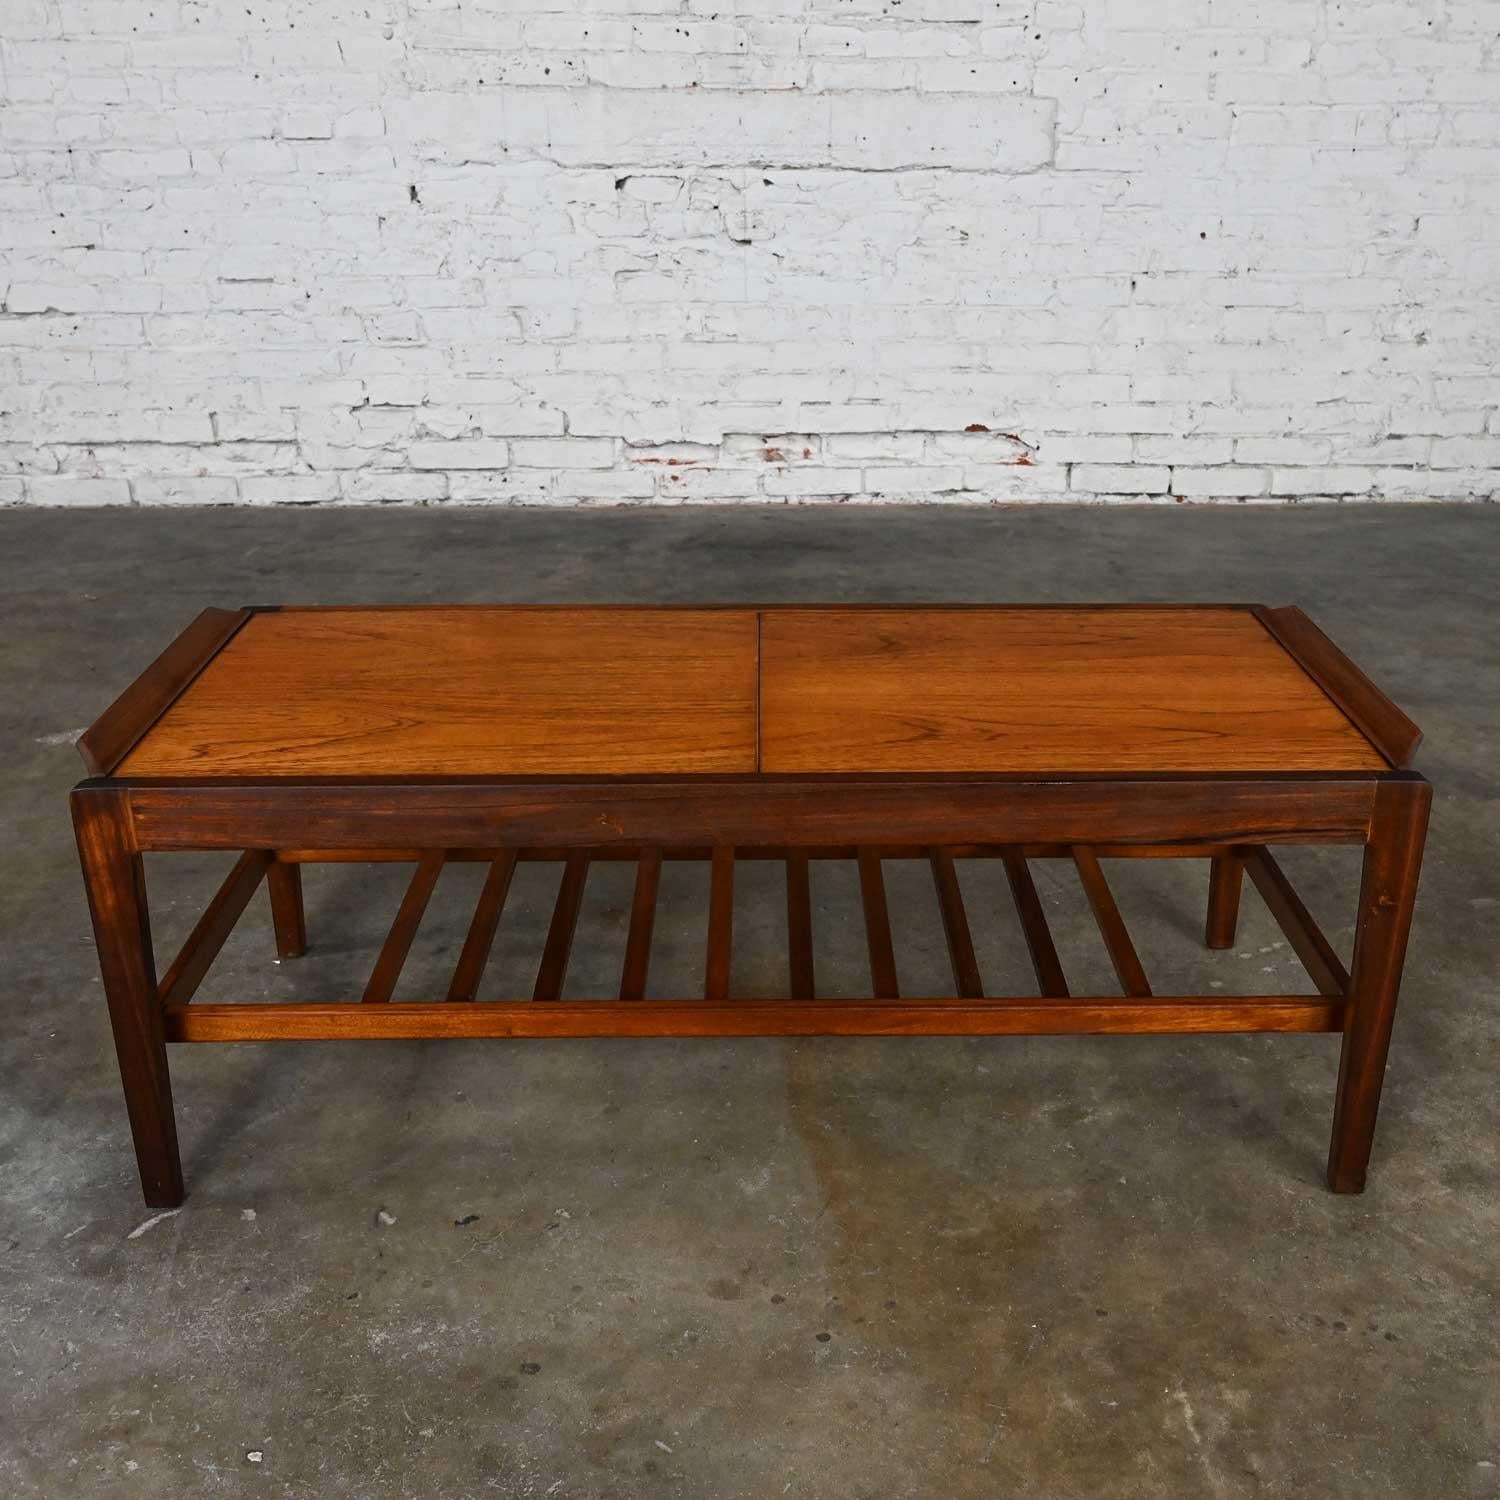 1960s Mcm Scandinavian Modern Style Teak Extending Coffee Table Top Att Remploy In Good Condition For Sale In Topeka, KS